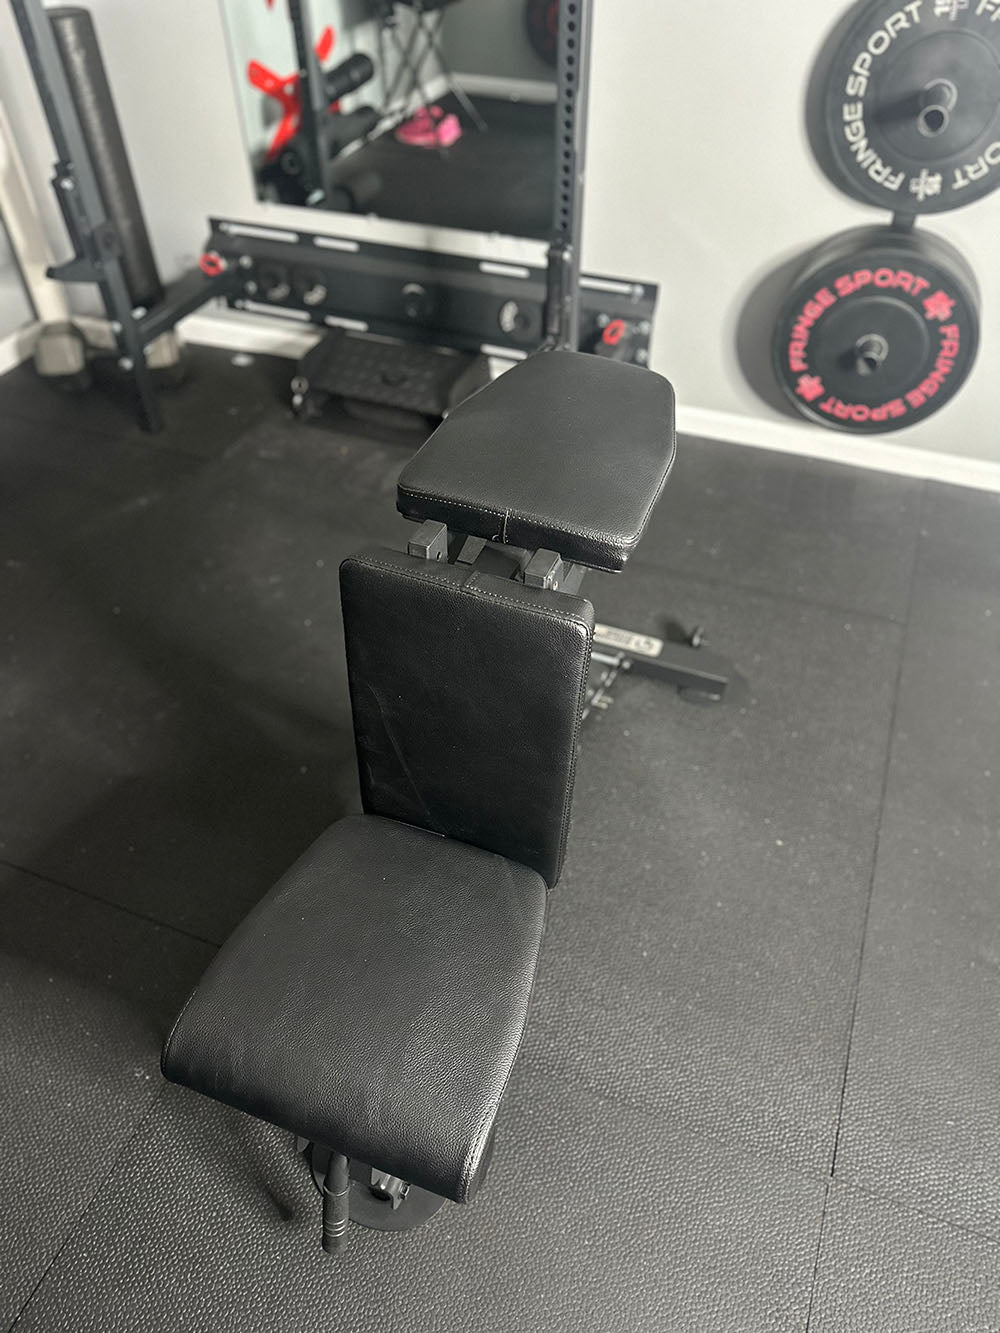 The Edge Infinity Bench is a bench that combines three separate benches all into one bench. You get the benefits of a flat bench, incline bench, and half bench all in one device. This image presents the bench from an elevated front view.